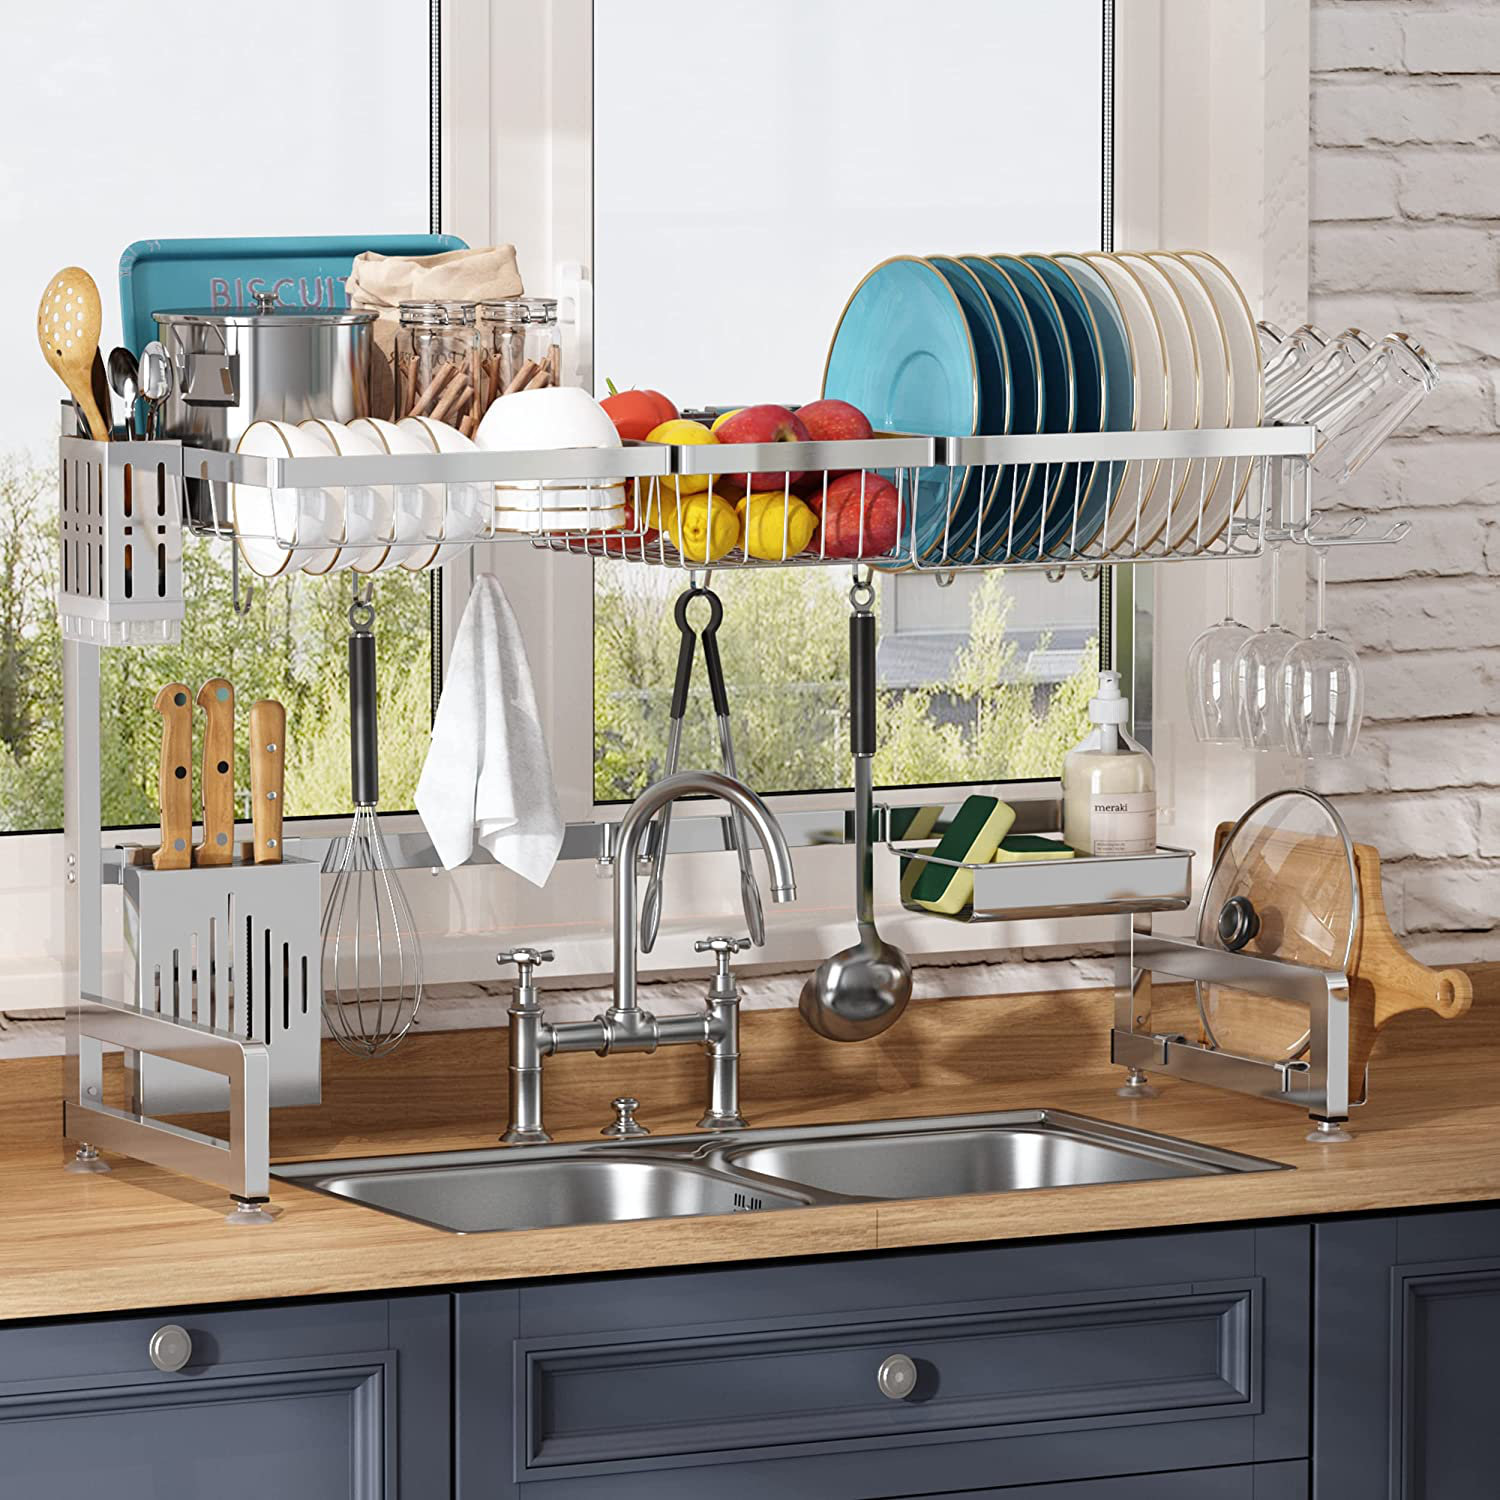 Better Chef 16 in. 2-Tier Silver Chrome Plated Standing Dish Rack